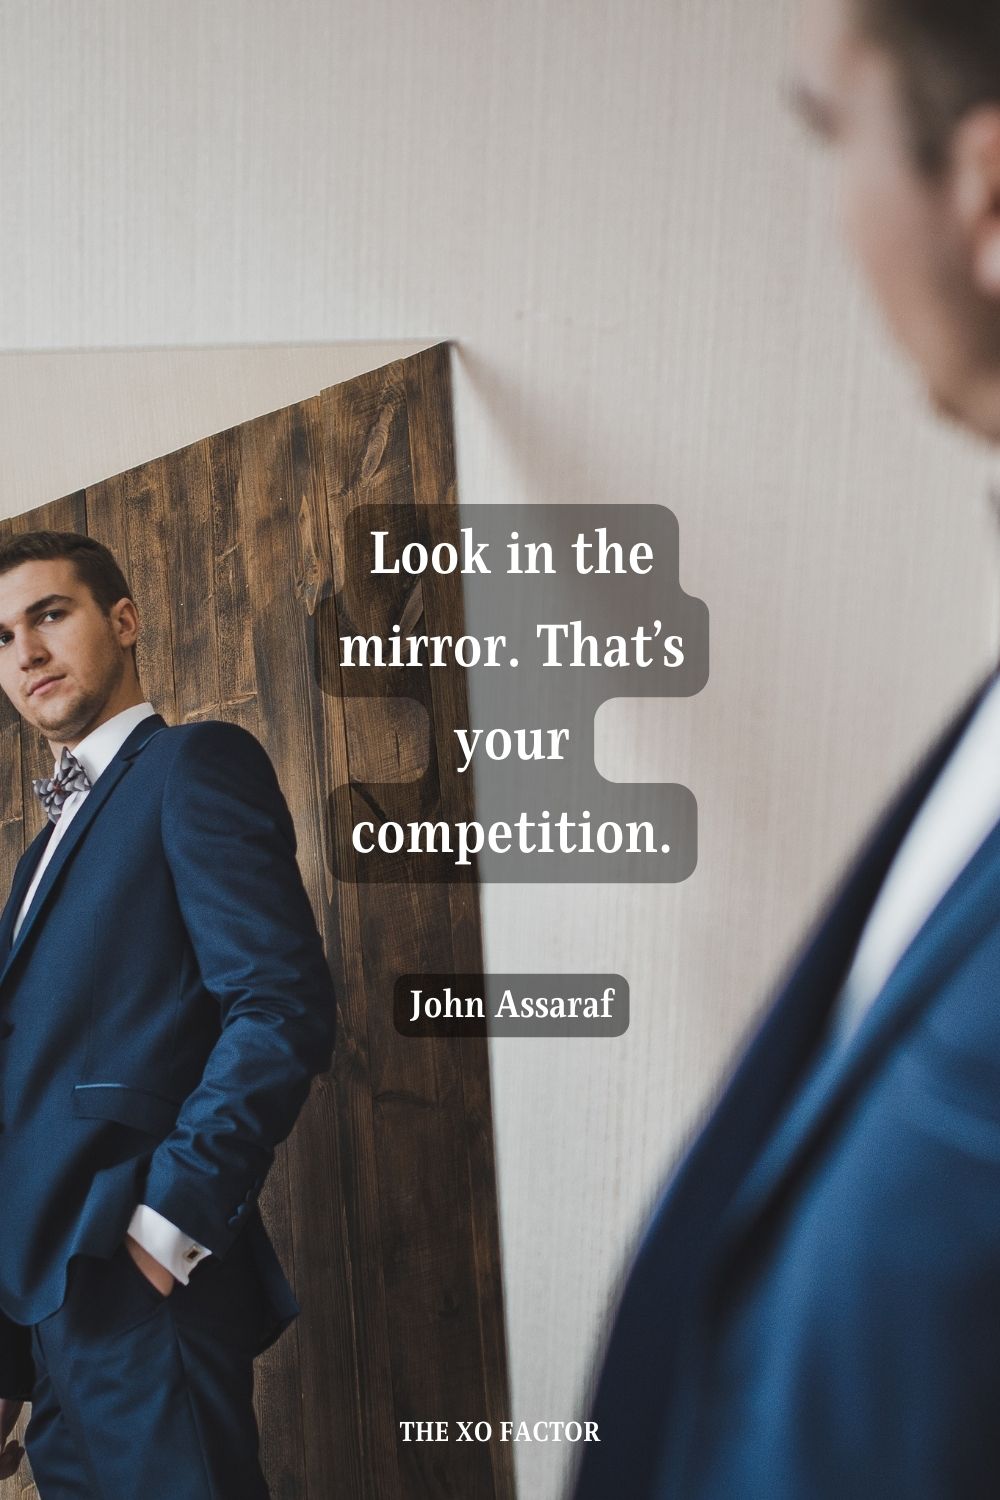 Look in the mirror. That’s your competition. John Assaraf